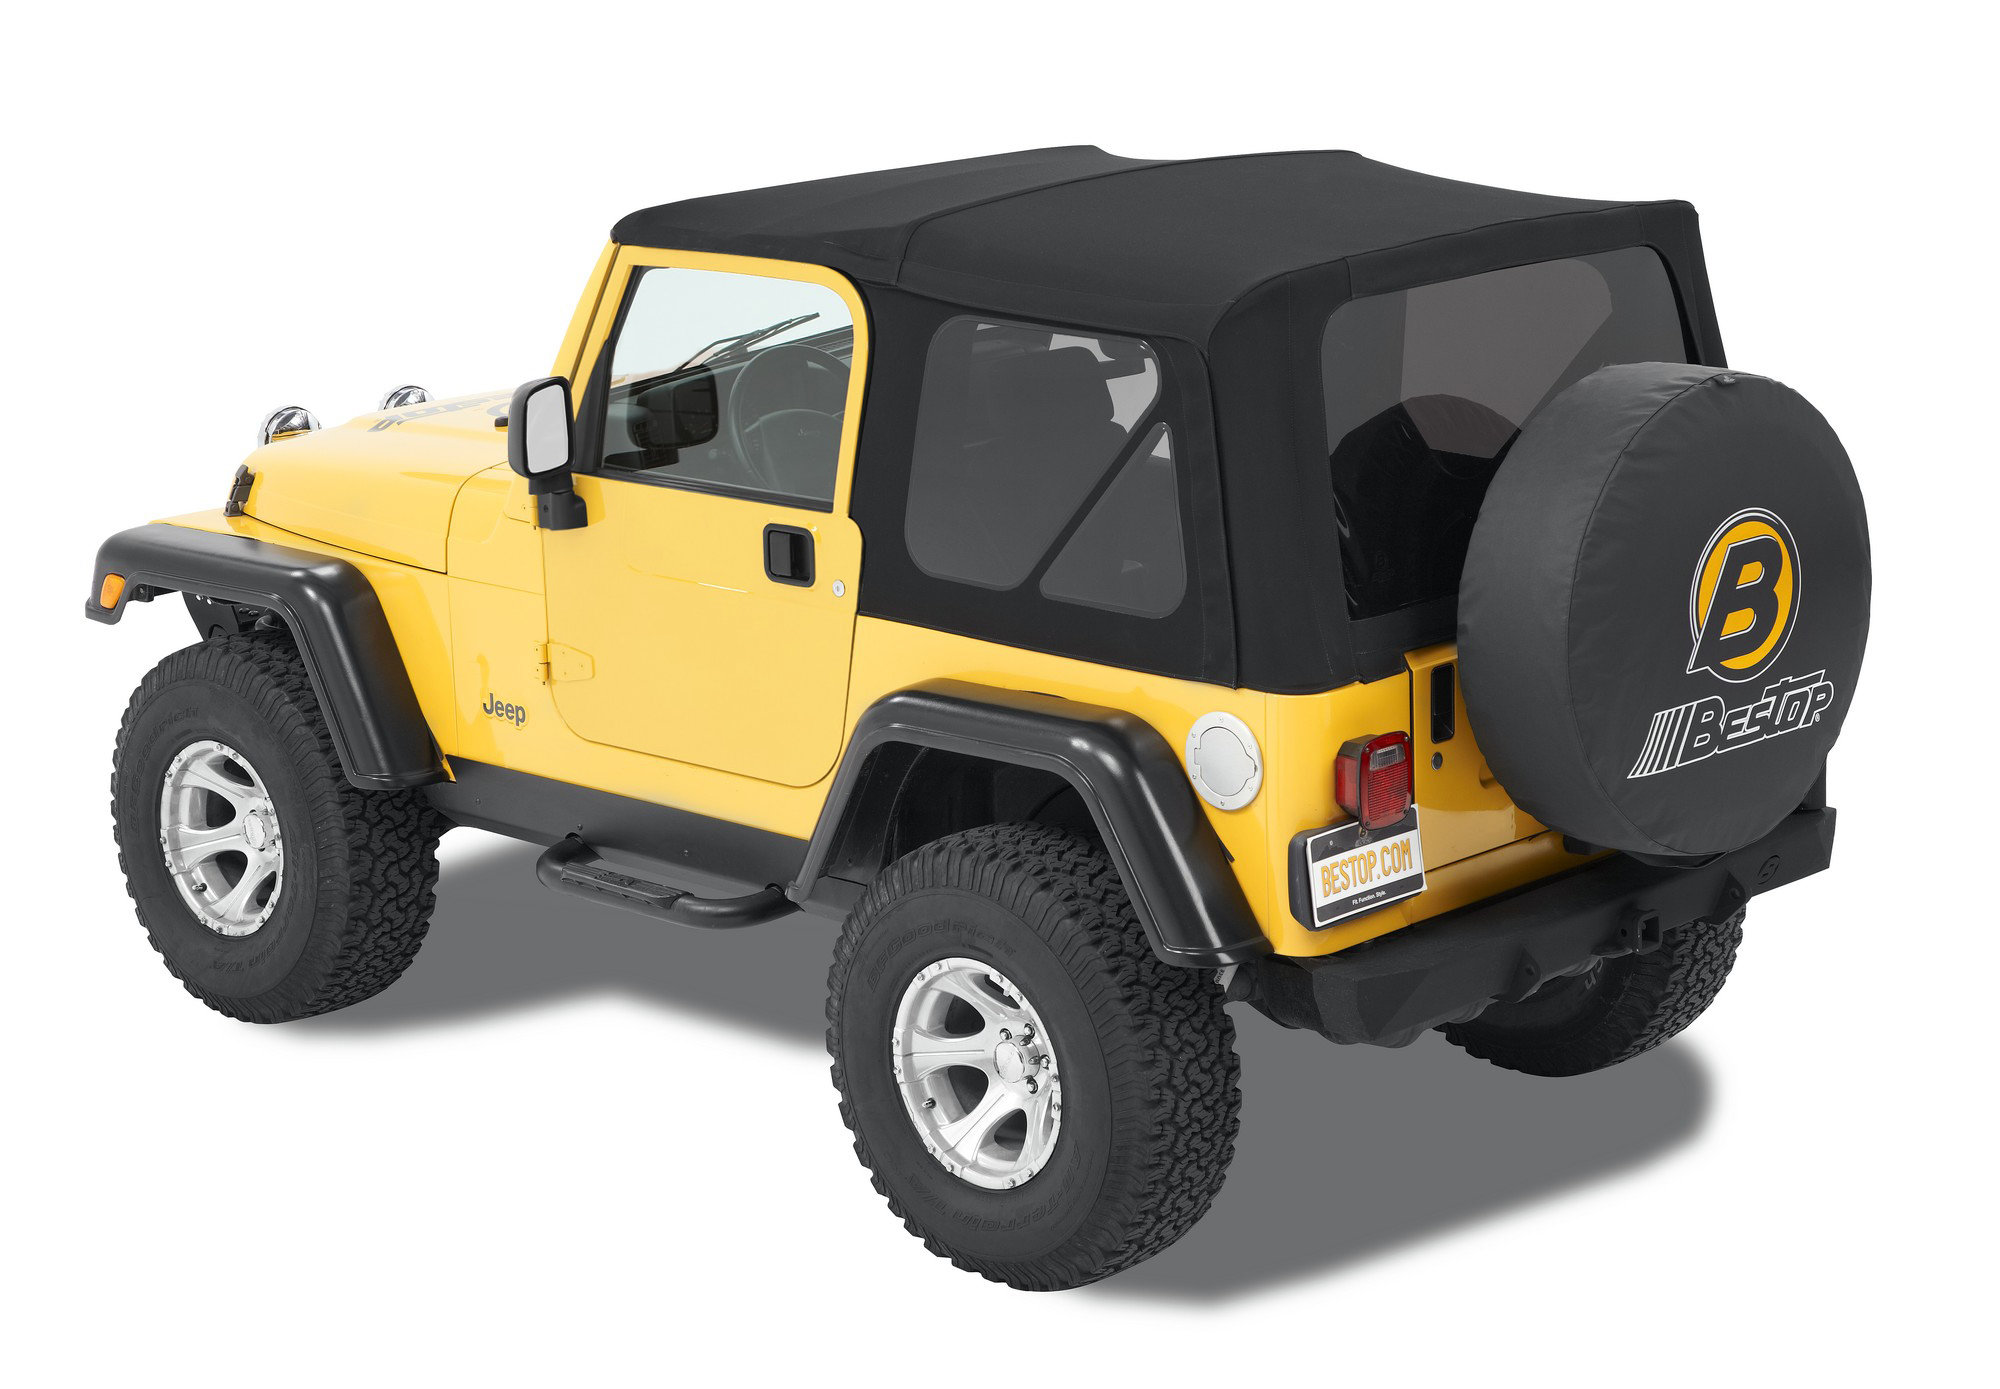 Bestop 79841-17 Twill Replace-a-top Soft Top with Tinted Windows without  Doors in Black for 97-06 Jeep Wrangler TJ | Quadratec